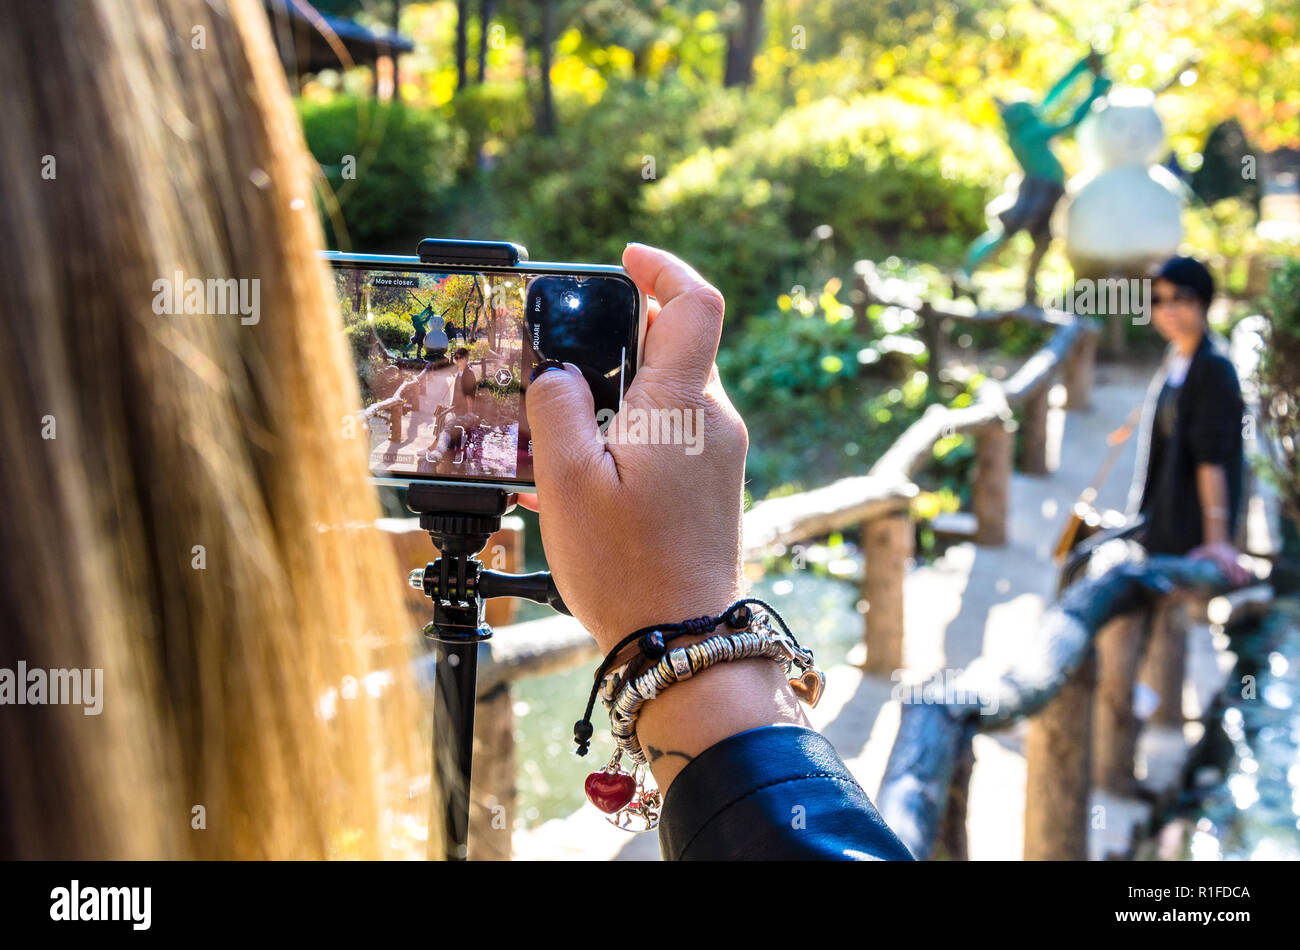 Over the shoulder shot as a lady takes a photograph of her friend using an iPhone smartphone. Stock Photo